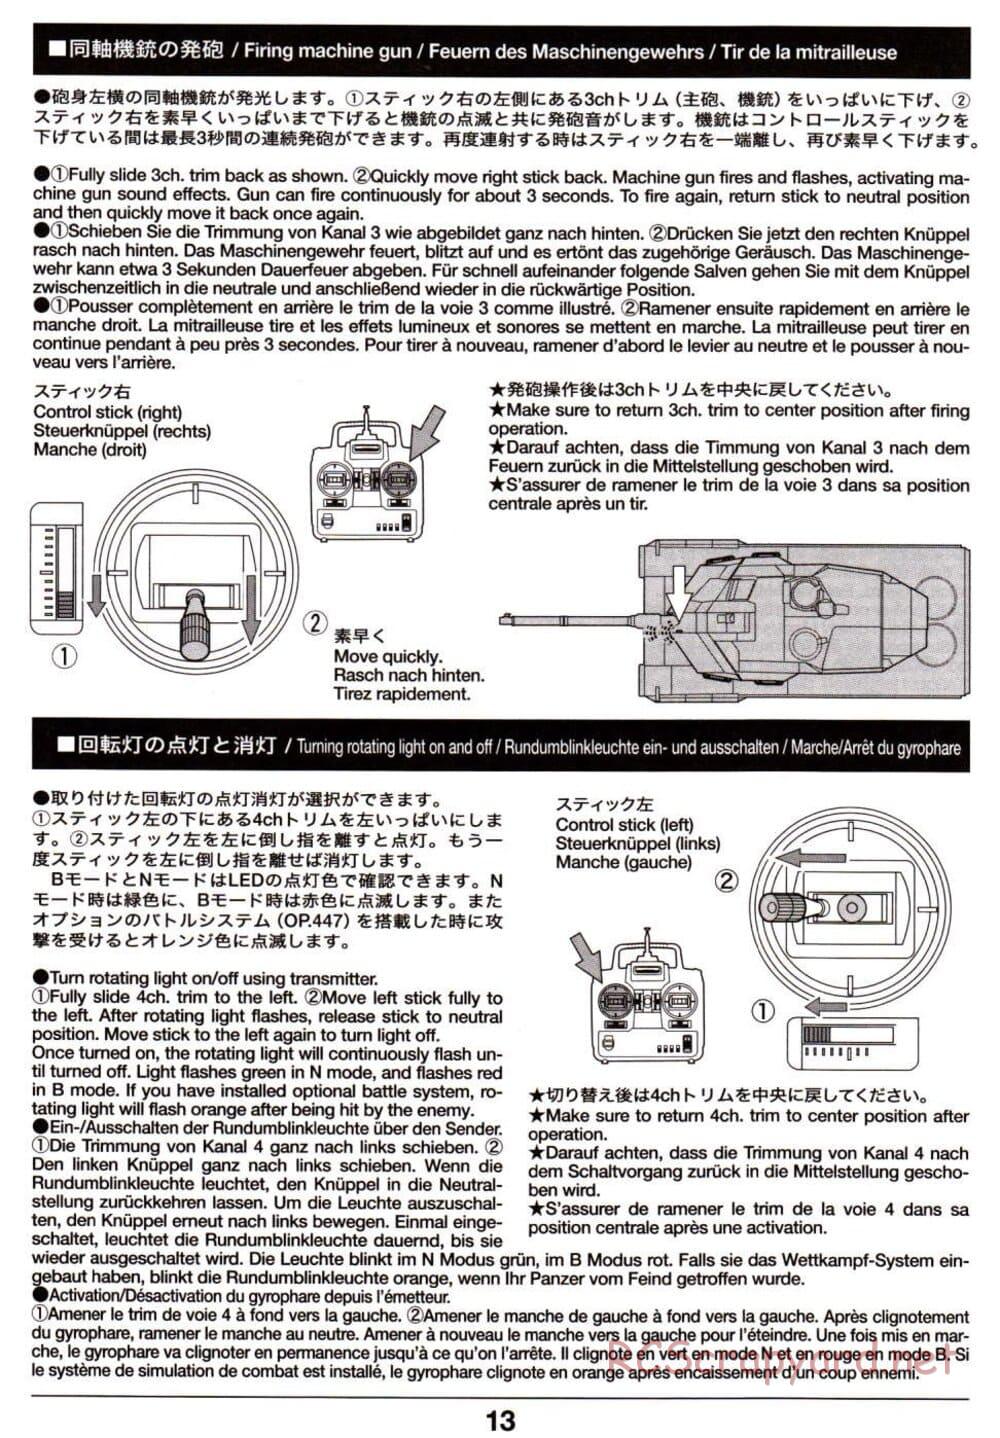 Tamiya - Leopard 2 A6 - 1/16 Scale Chassis - Operation Manual - Page 13